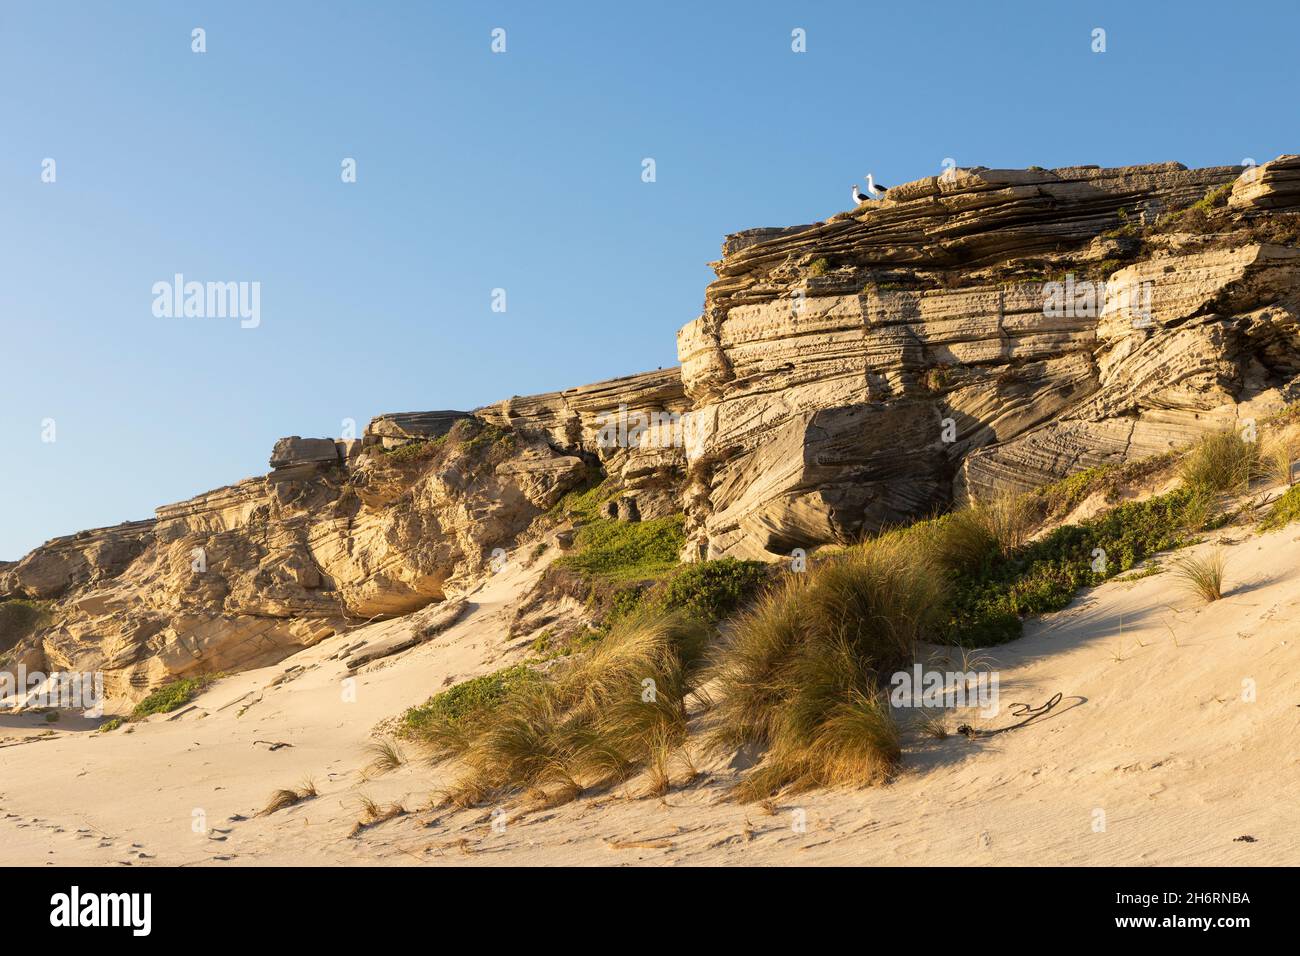 Cliffs above a sandy beach with layered rocks, two seagulls perched at the top. Stock Photo